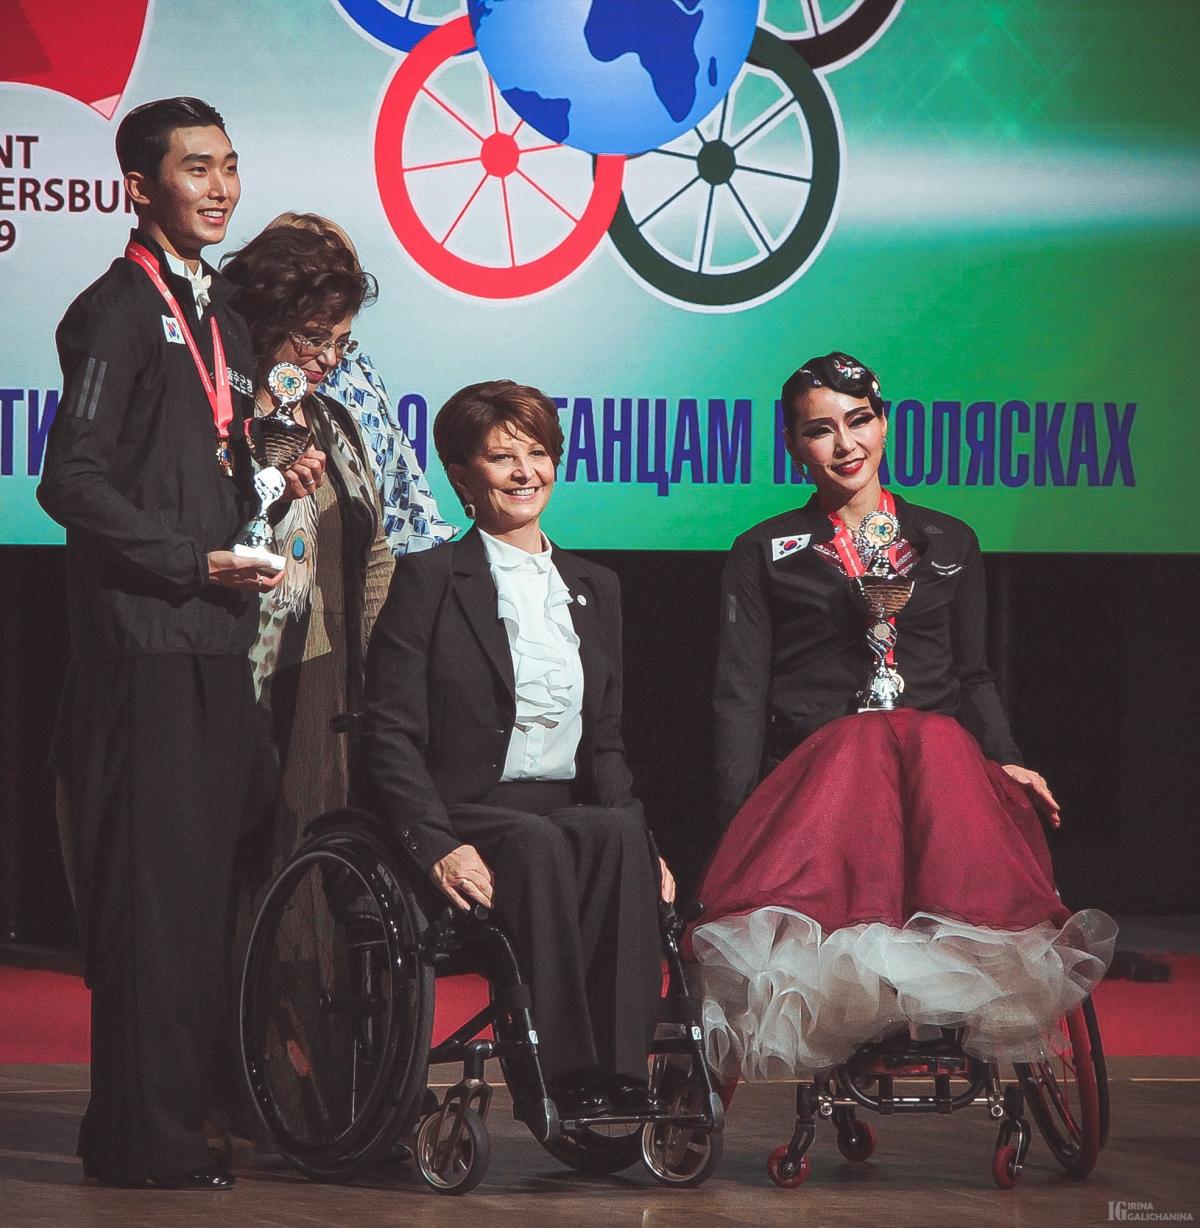 Female dancer in wheelchair and male standing partner on stage with award